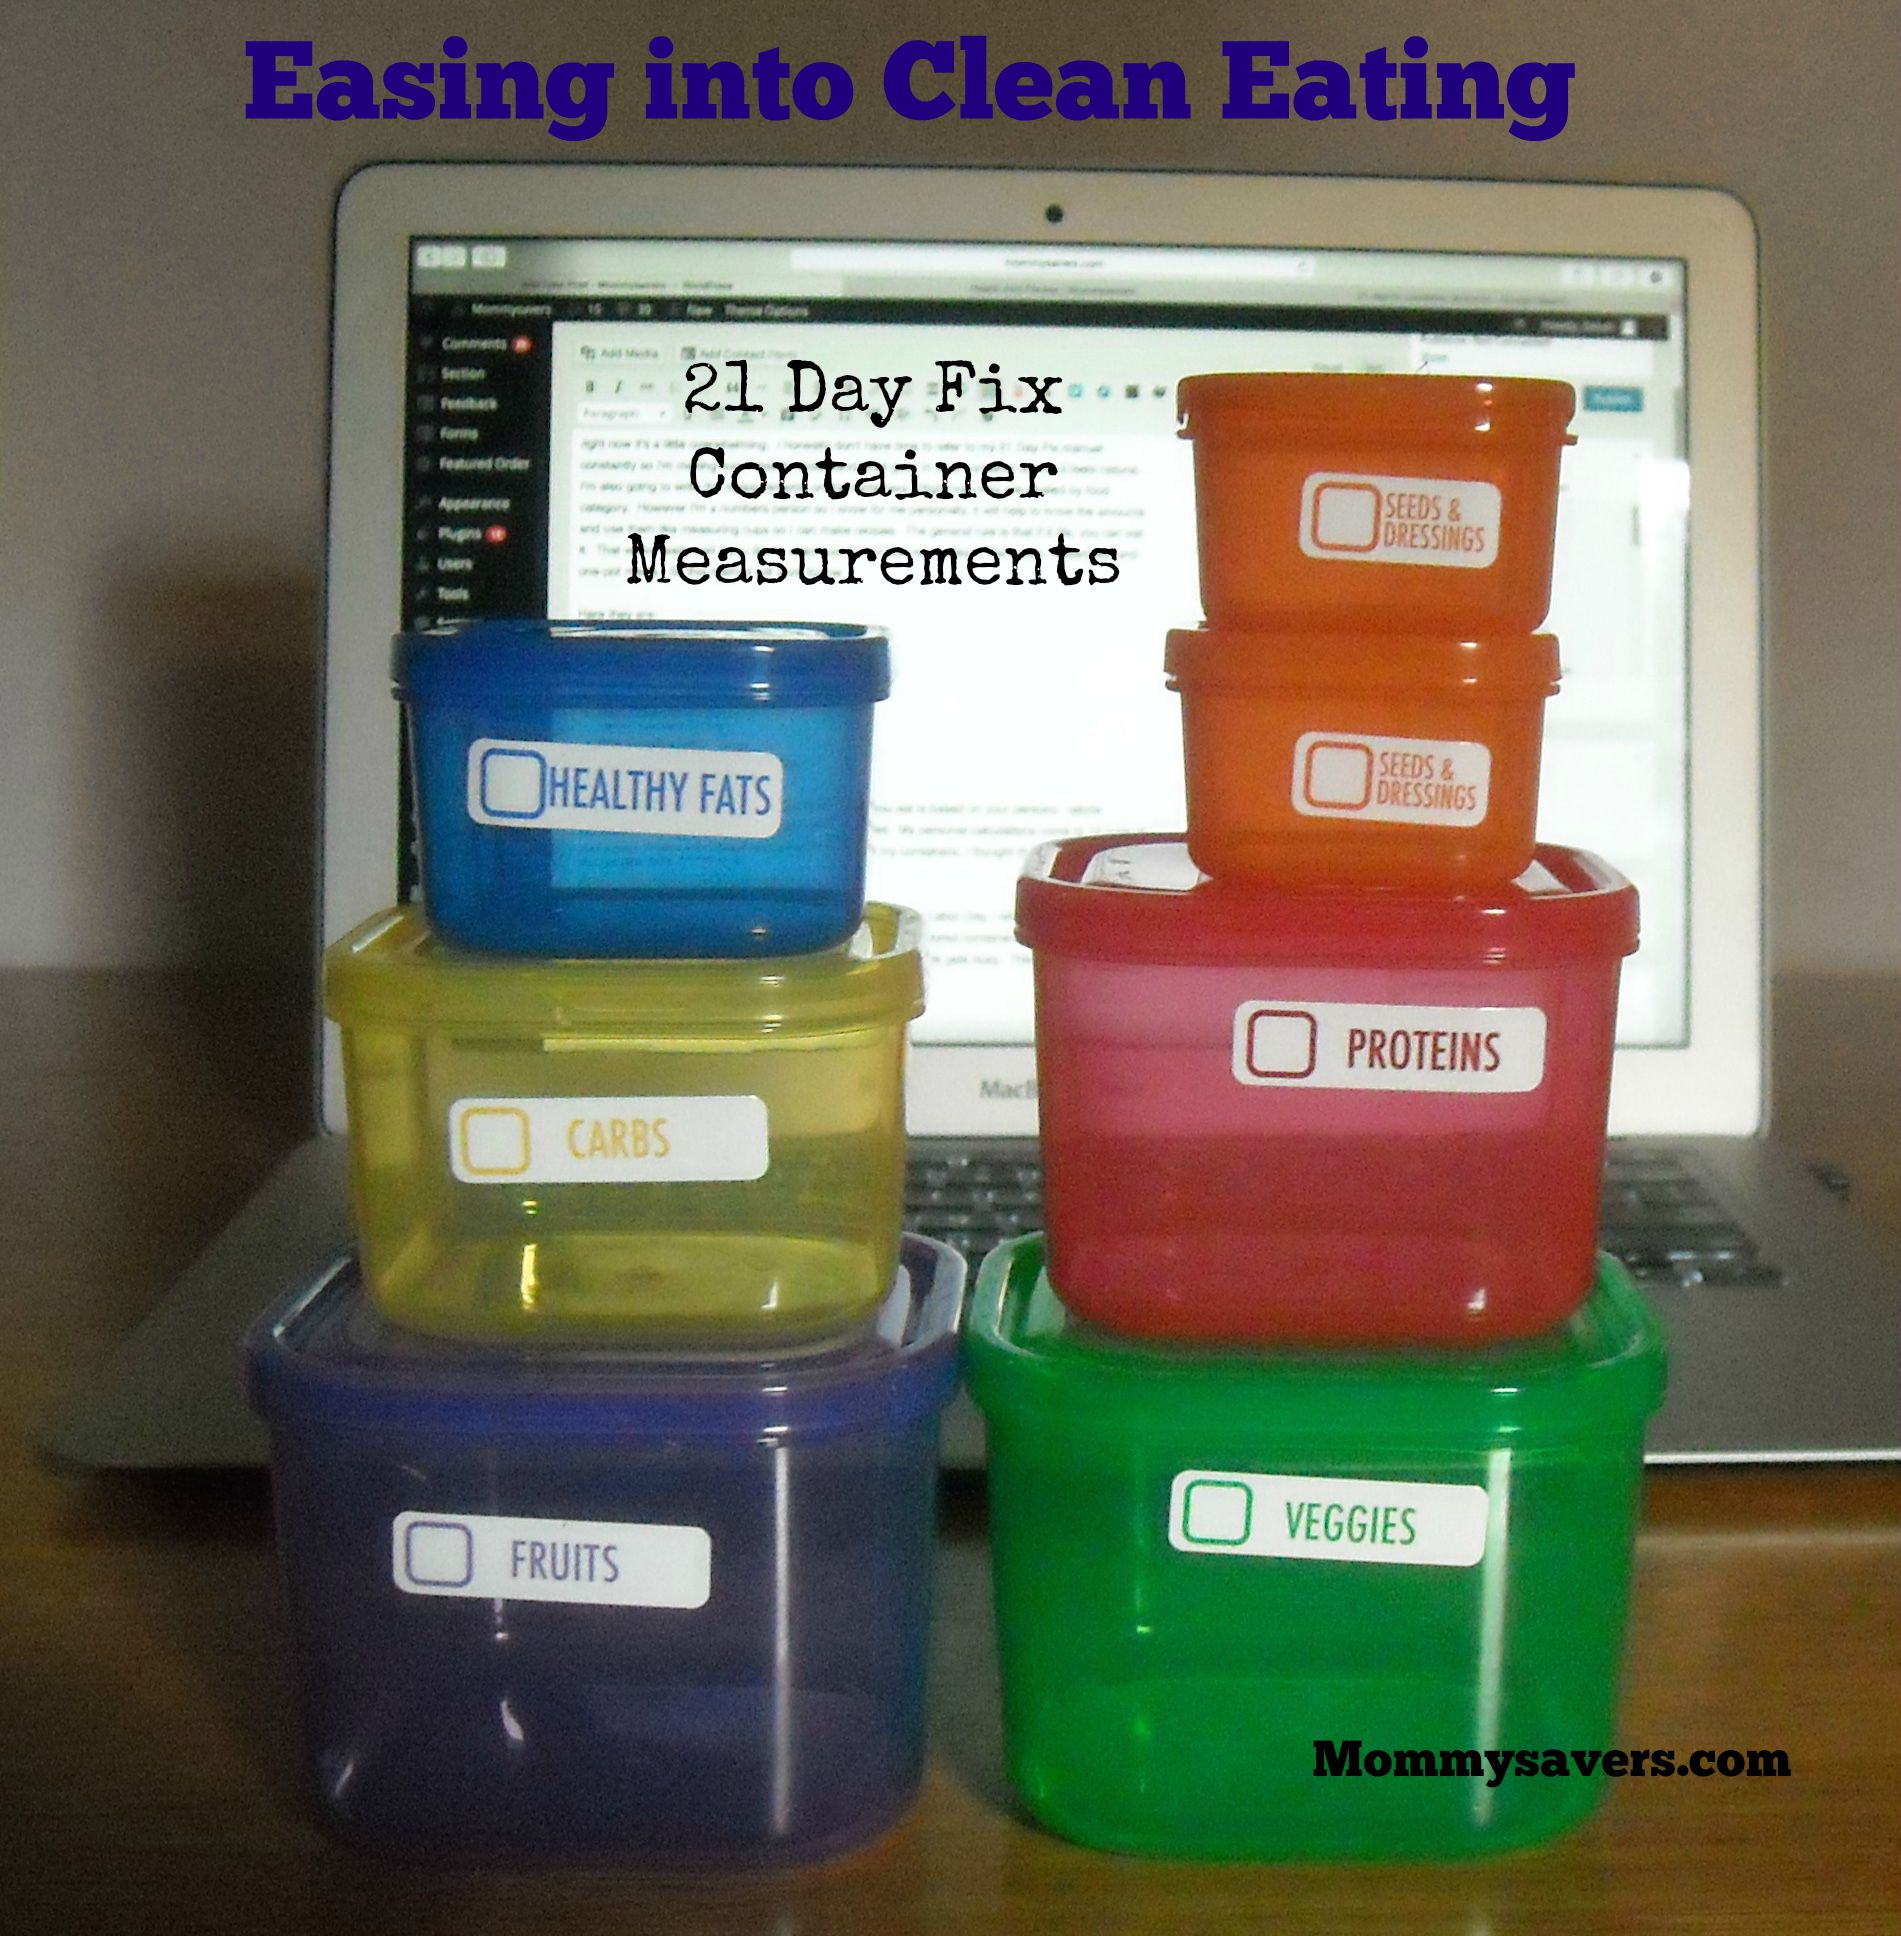 21-day-fix-container-measurements-mommysavers